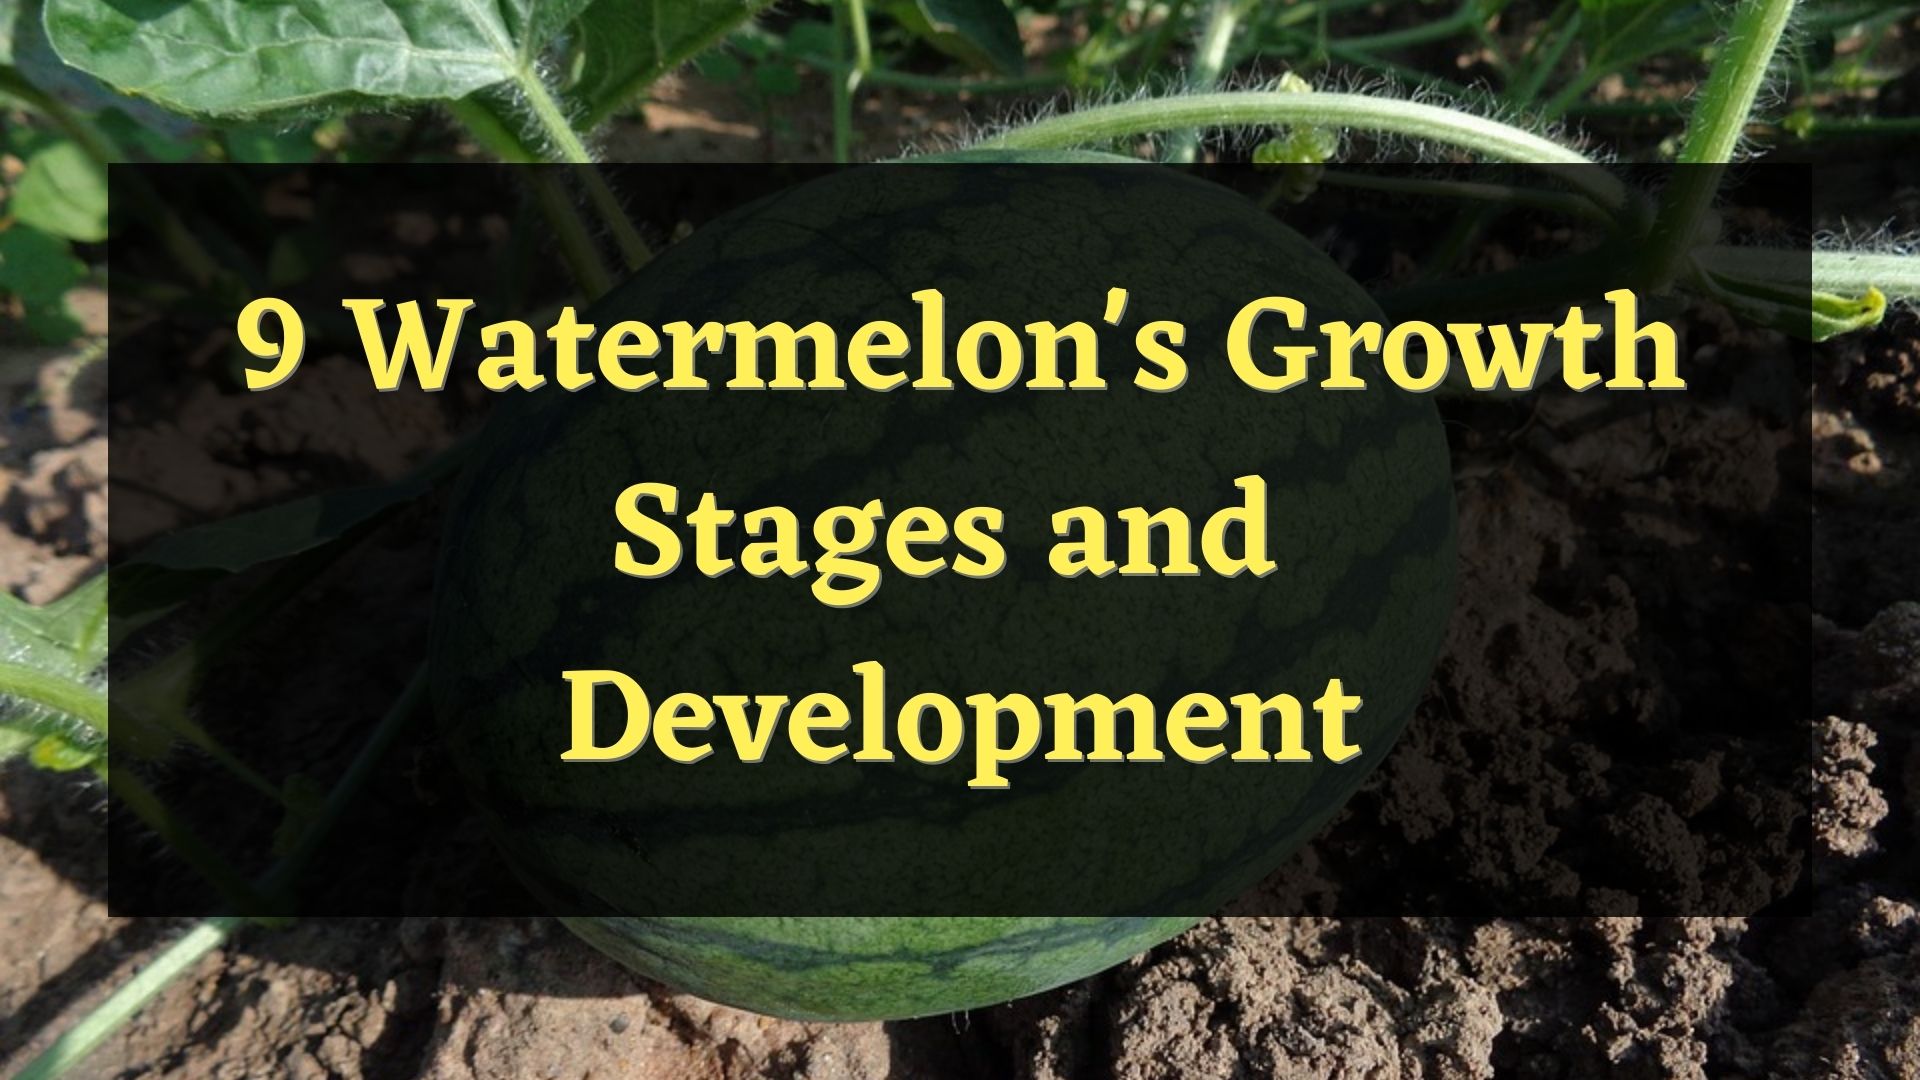 9 watermelons growth stages and development